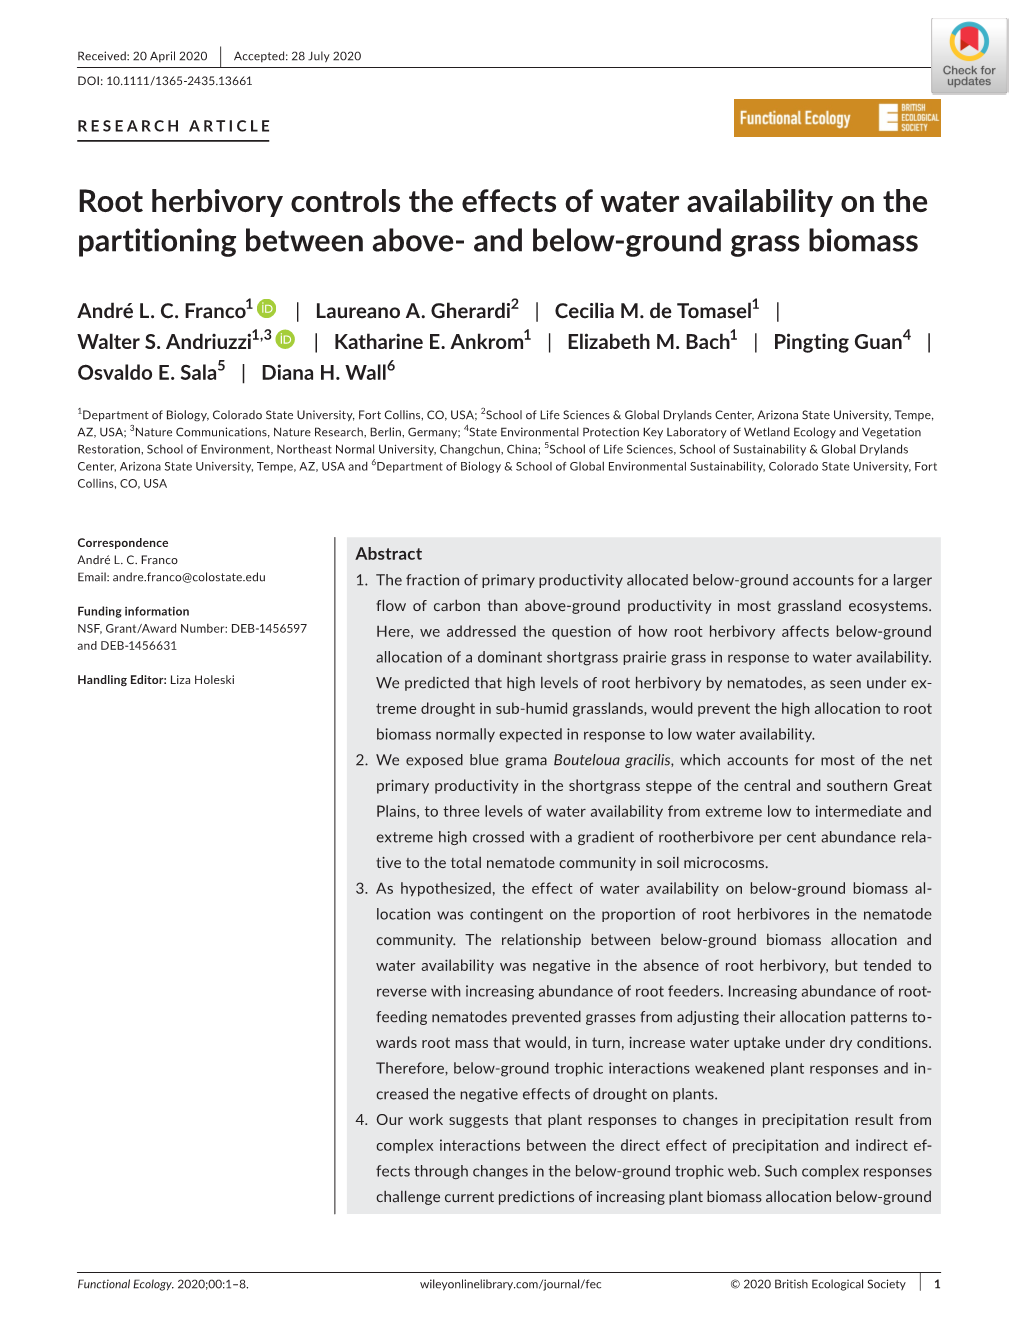 Root Herbivory Controls the Effects of Water Availability on the Partitioning Between Above‐ and Below‐Ground Grass Biomass